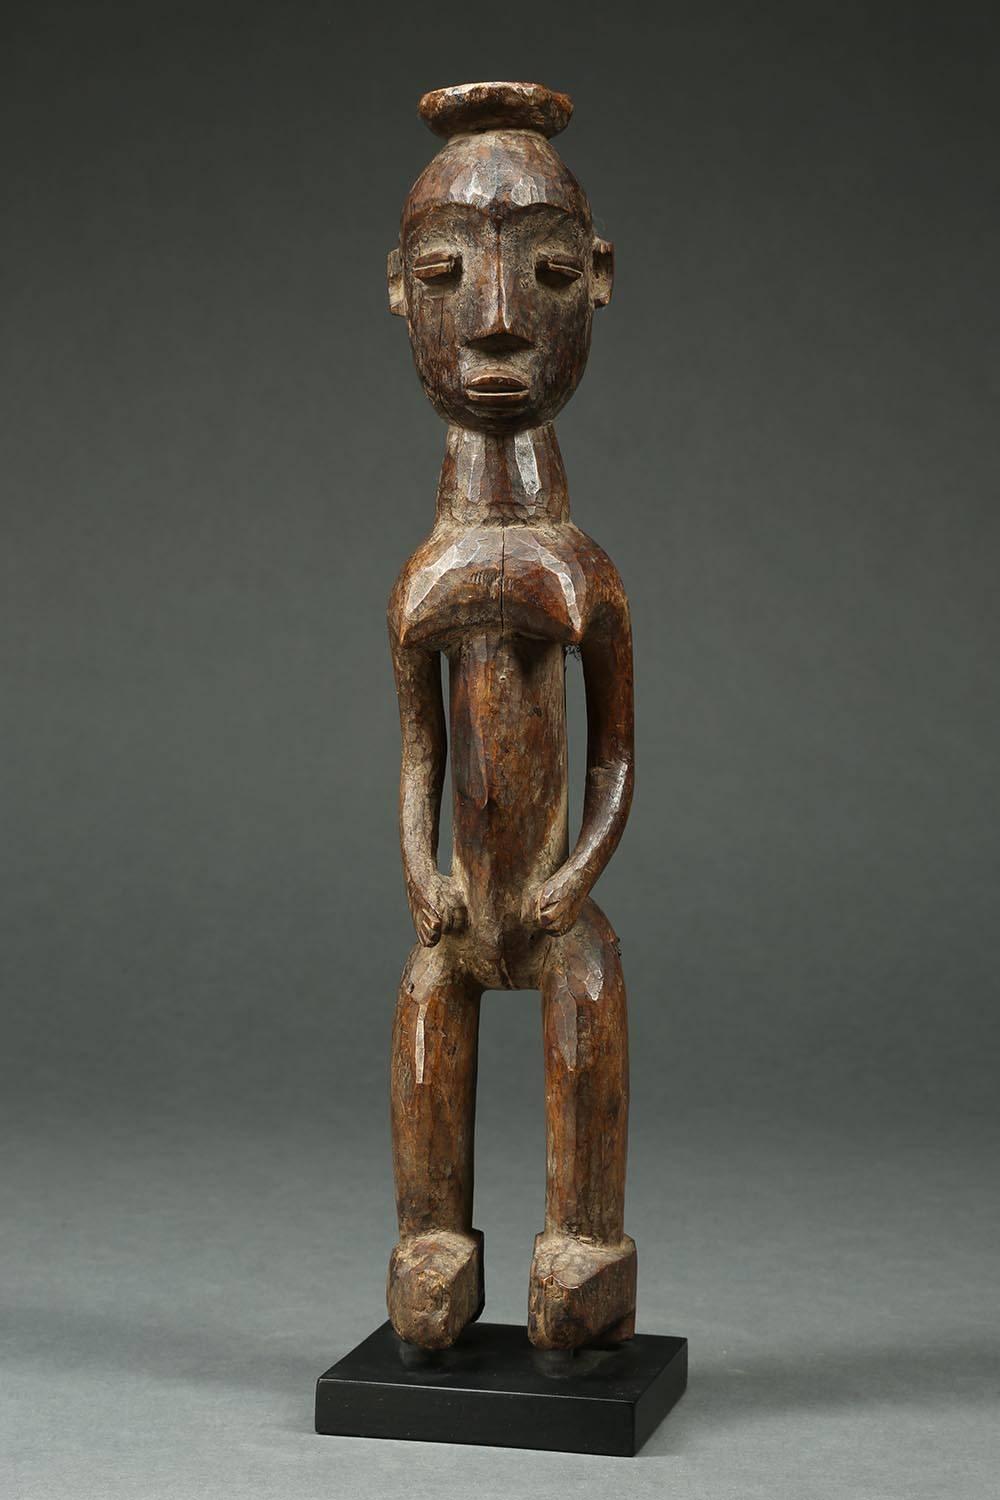 Tribal Lobi standing female figure, Ghana, Africa

Standing female figure with offering bowl on top of her head, nice sculpture, early colonial influence shown in high heel shoes.
Mid-20th century, 15